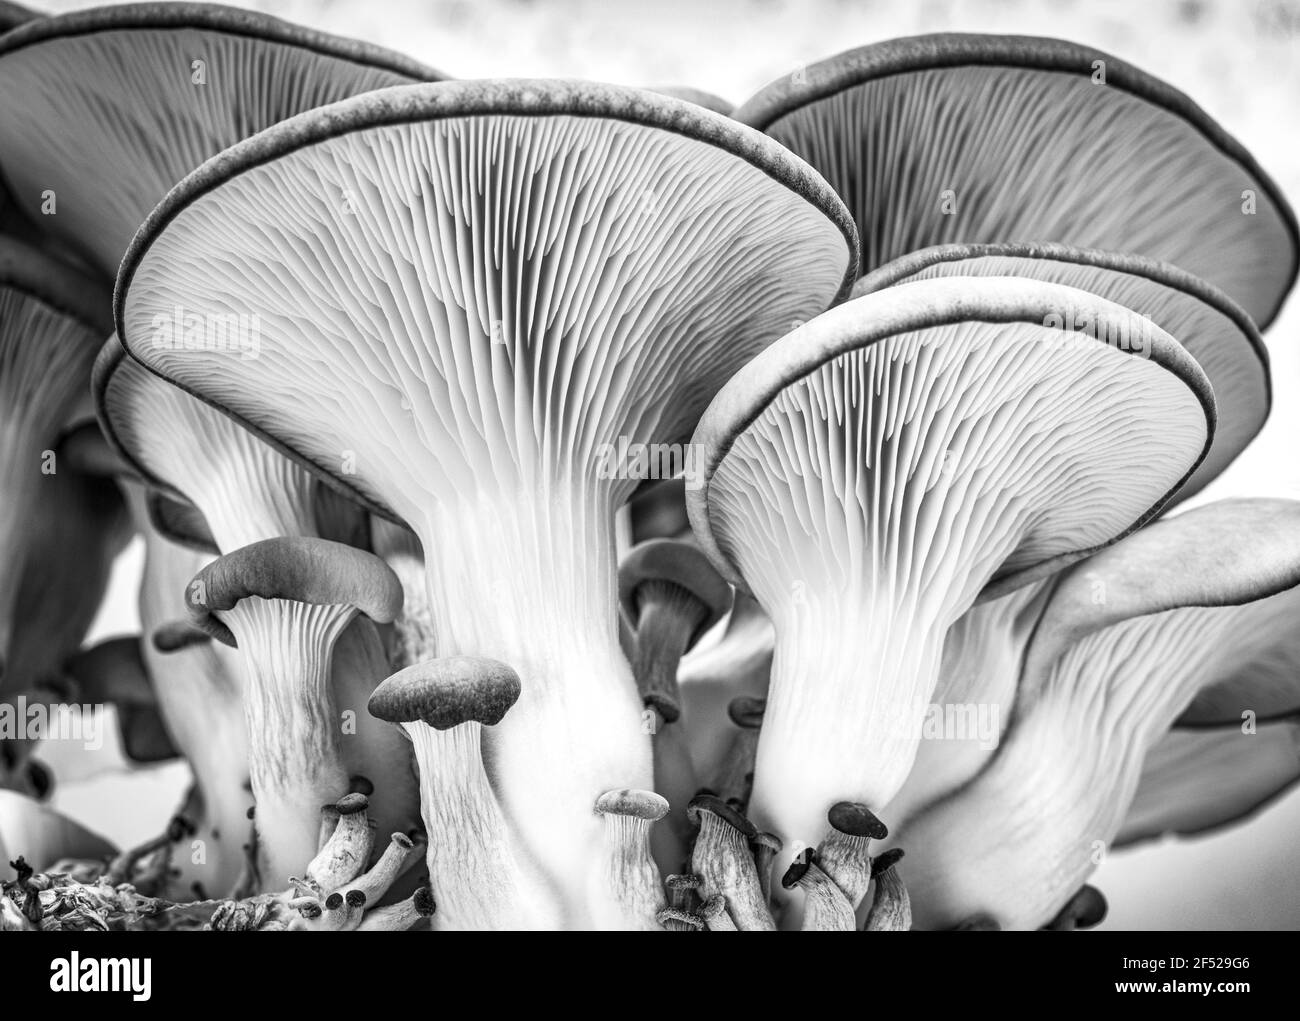 oyster mushrooms growing Stock Photo